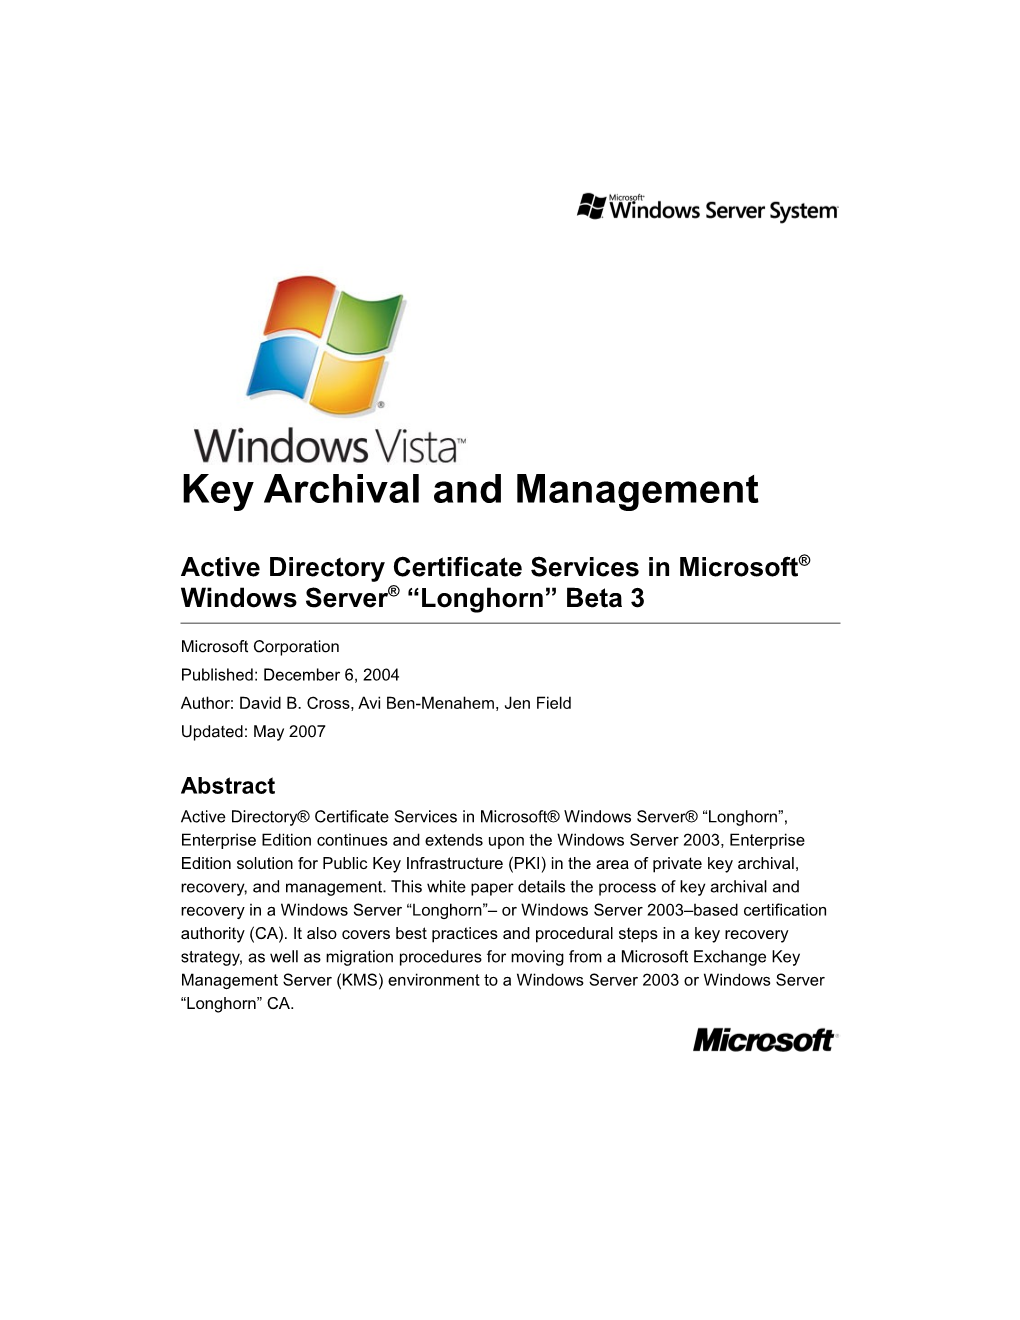 Key Archival and Management